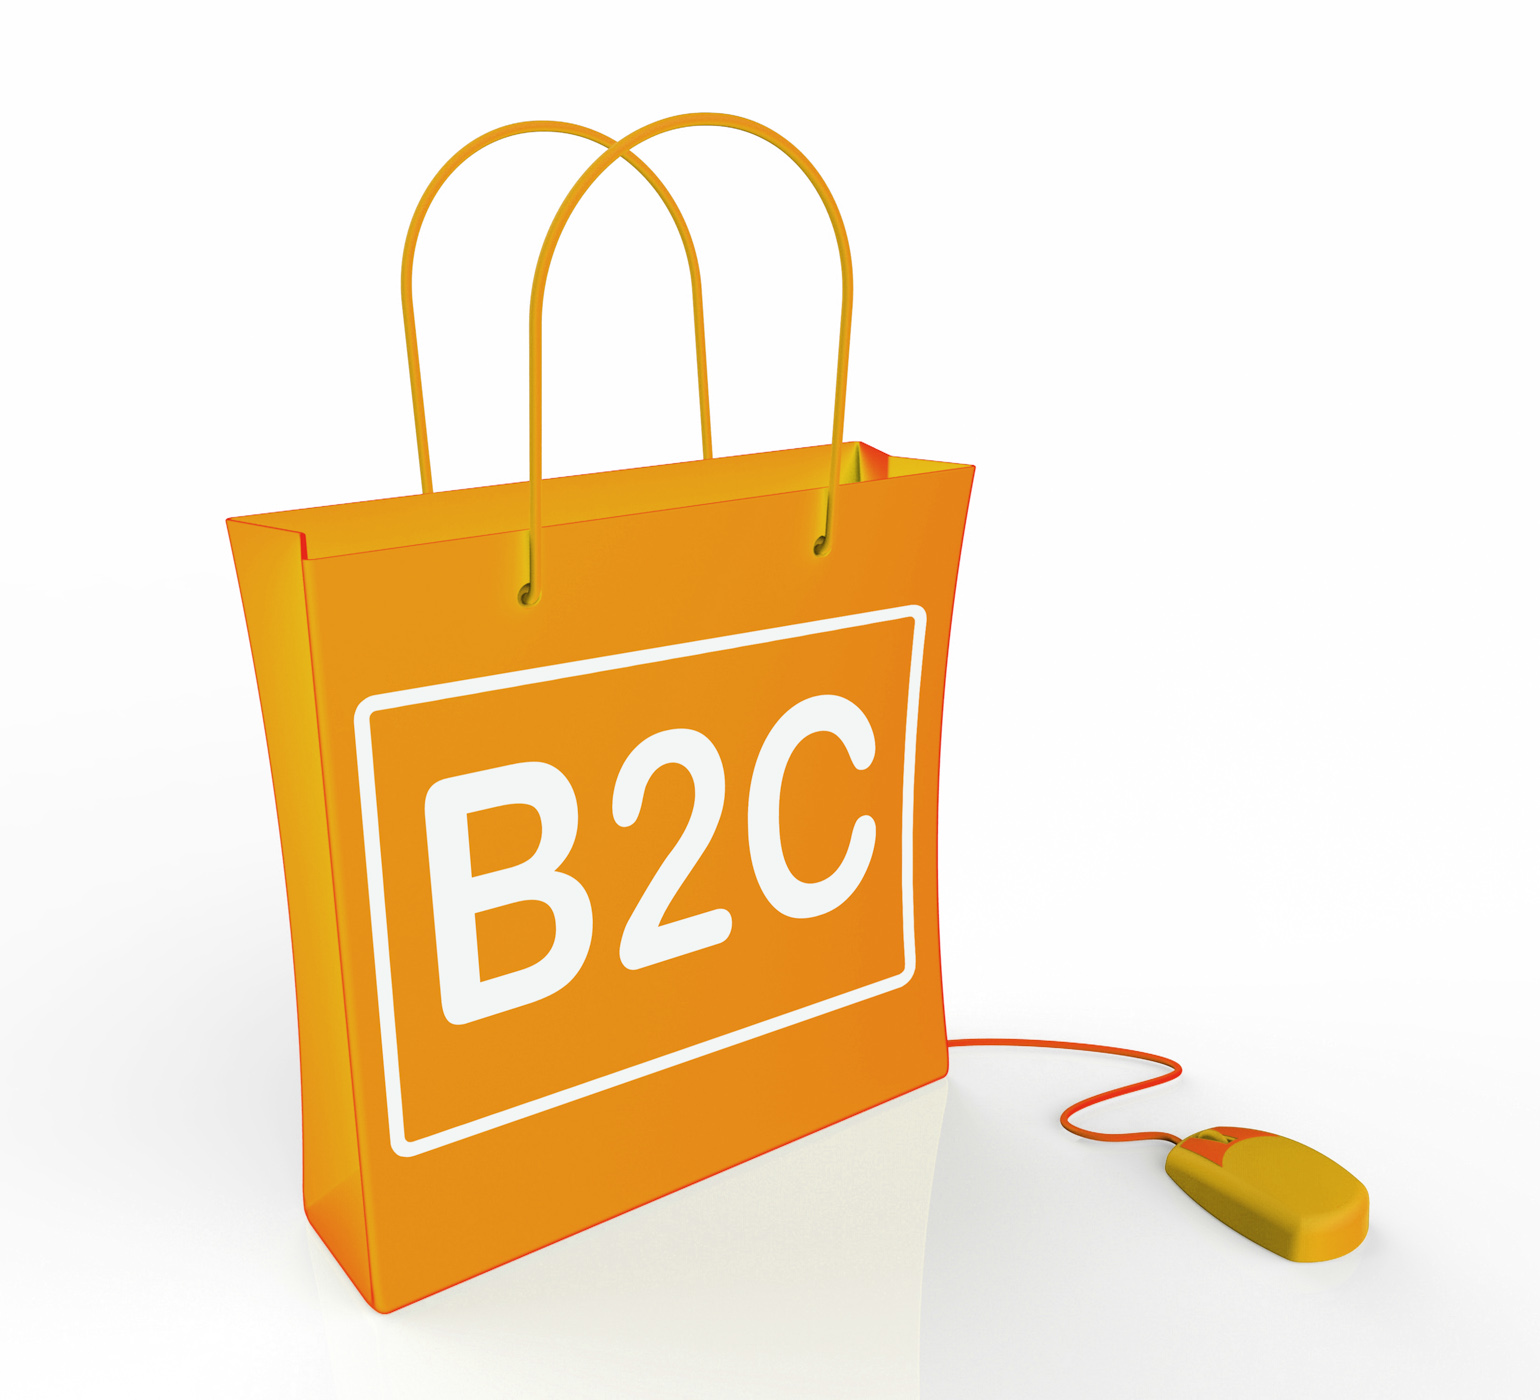 B2c bag represents online business and buying photo